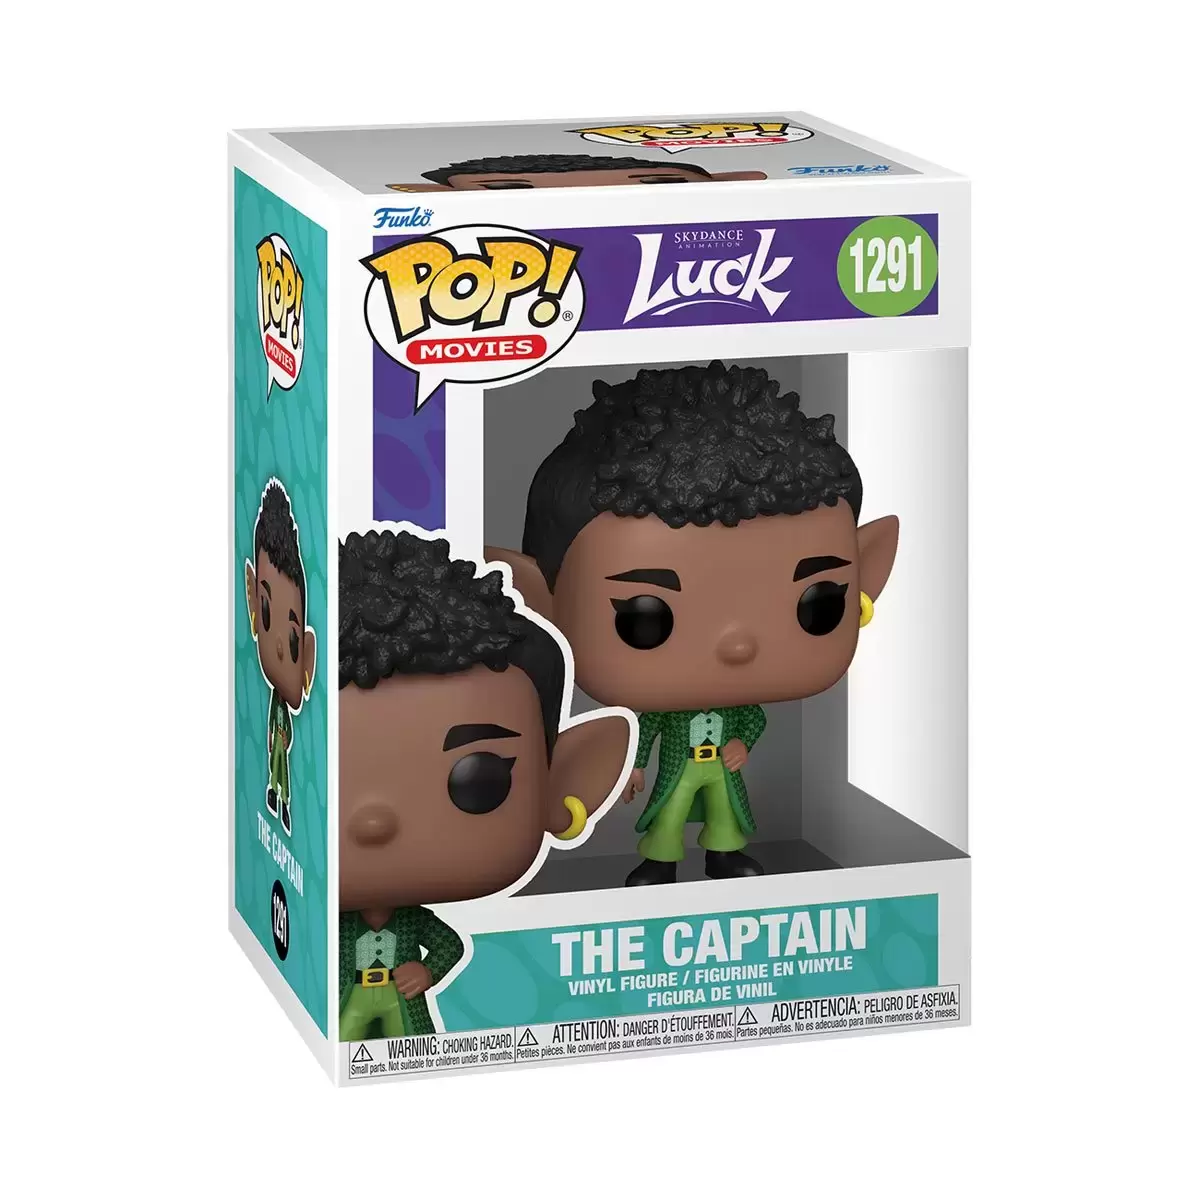 POP! Movies - Luck - The Captain